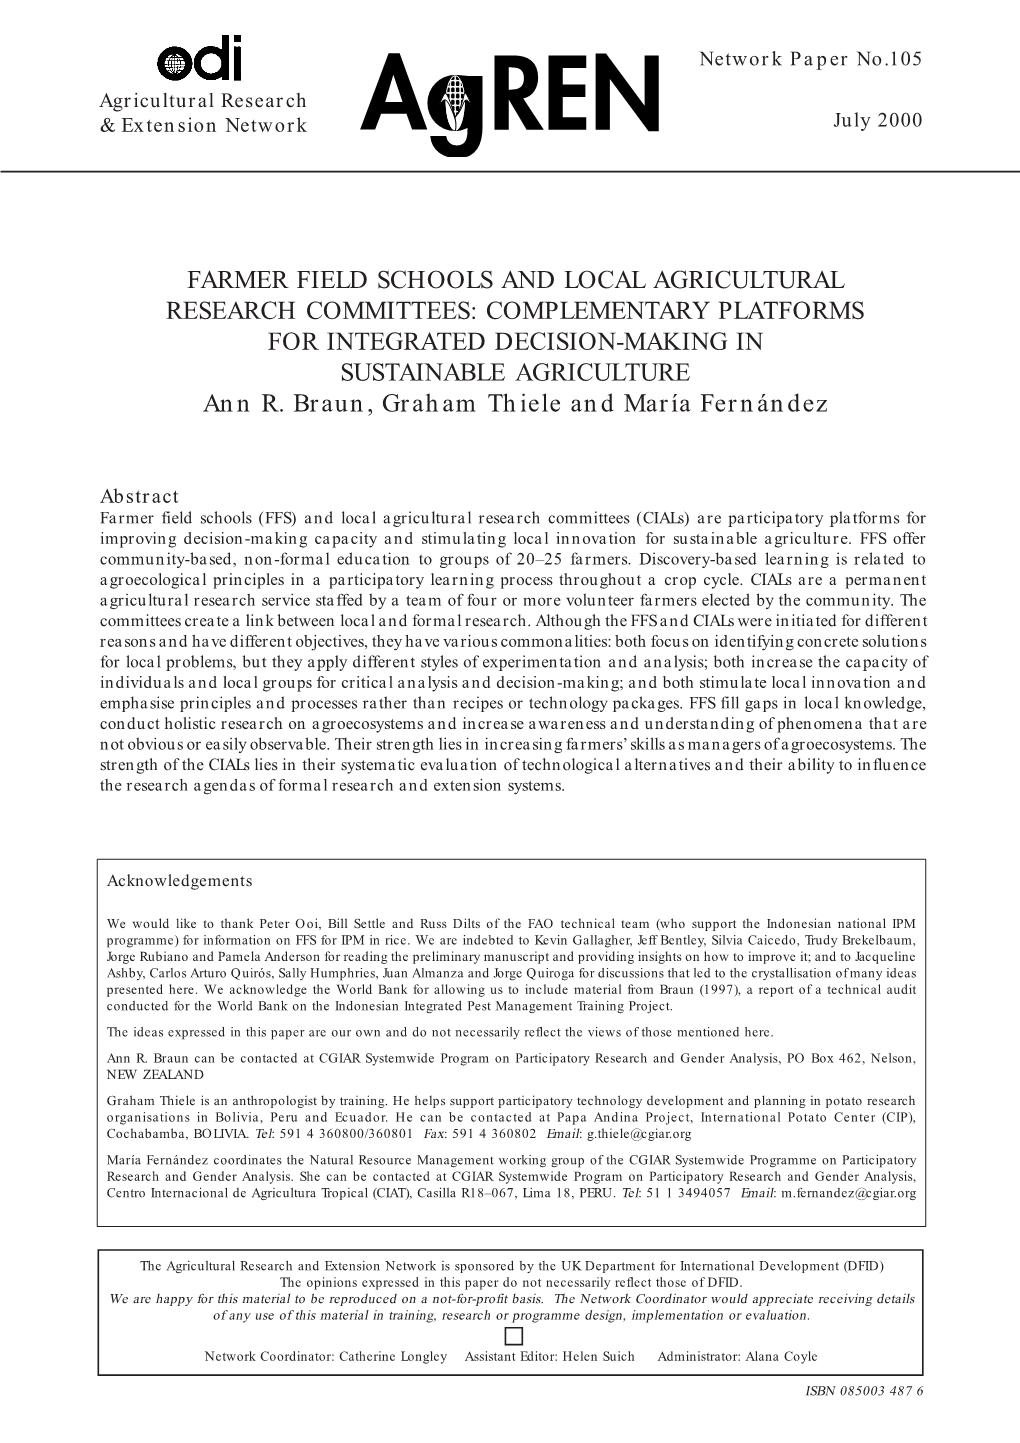 FARMER FIELD SCHOOLS and LOCAL AGRICULTURAL RESEARCH COMMITTEES: COMPLEMENTARY PLATFORMS for INTEGRATED DECISION-MAKING in SUSTAINABLE AGRICULTURE Ann R